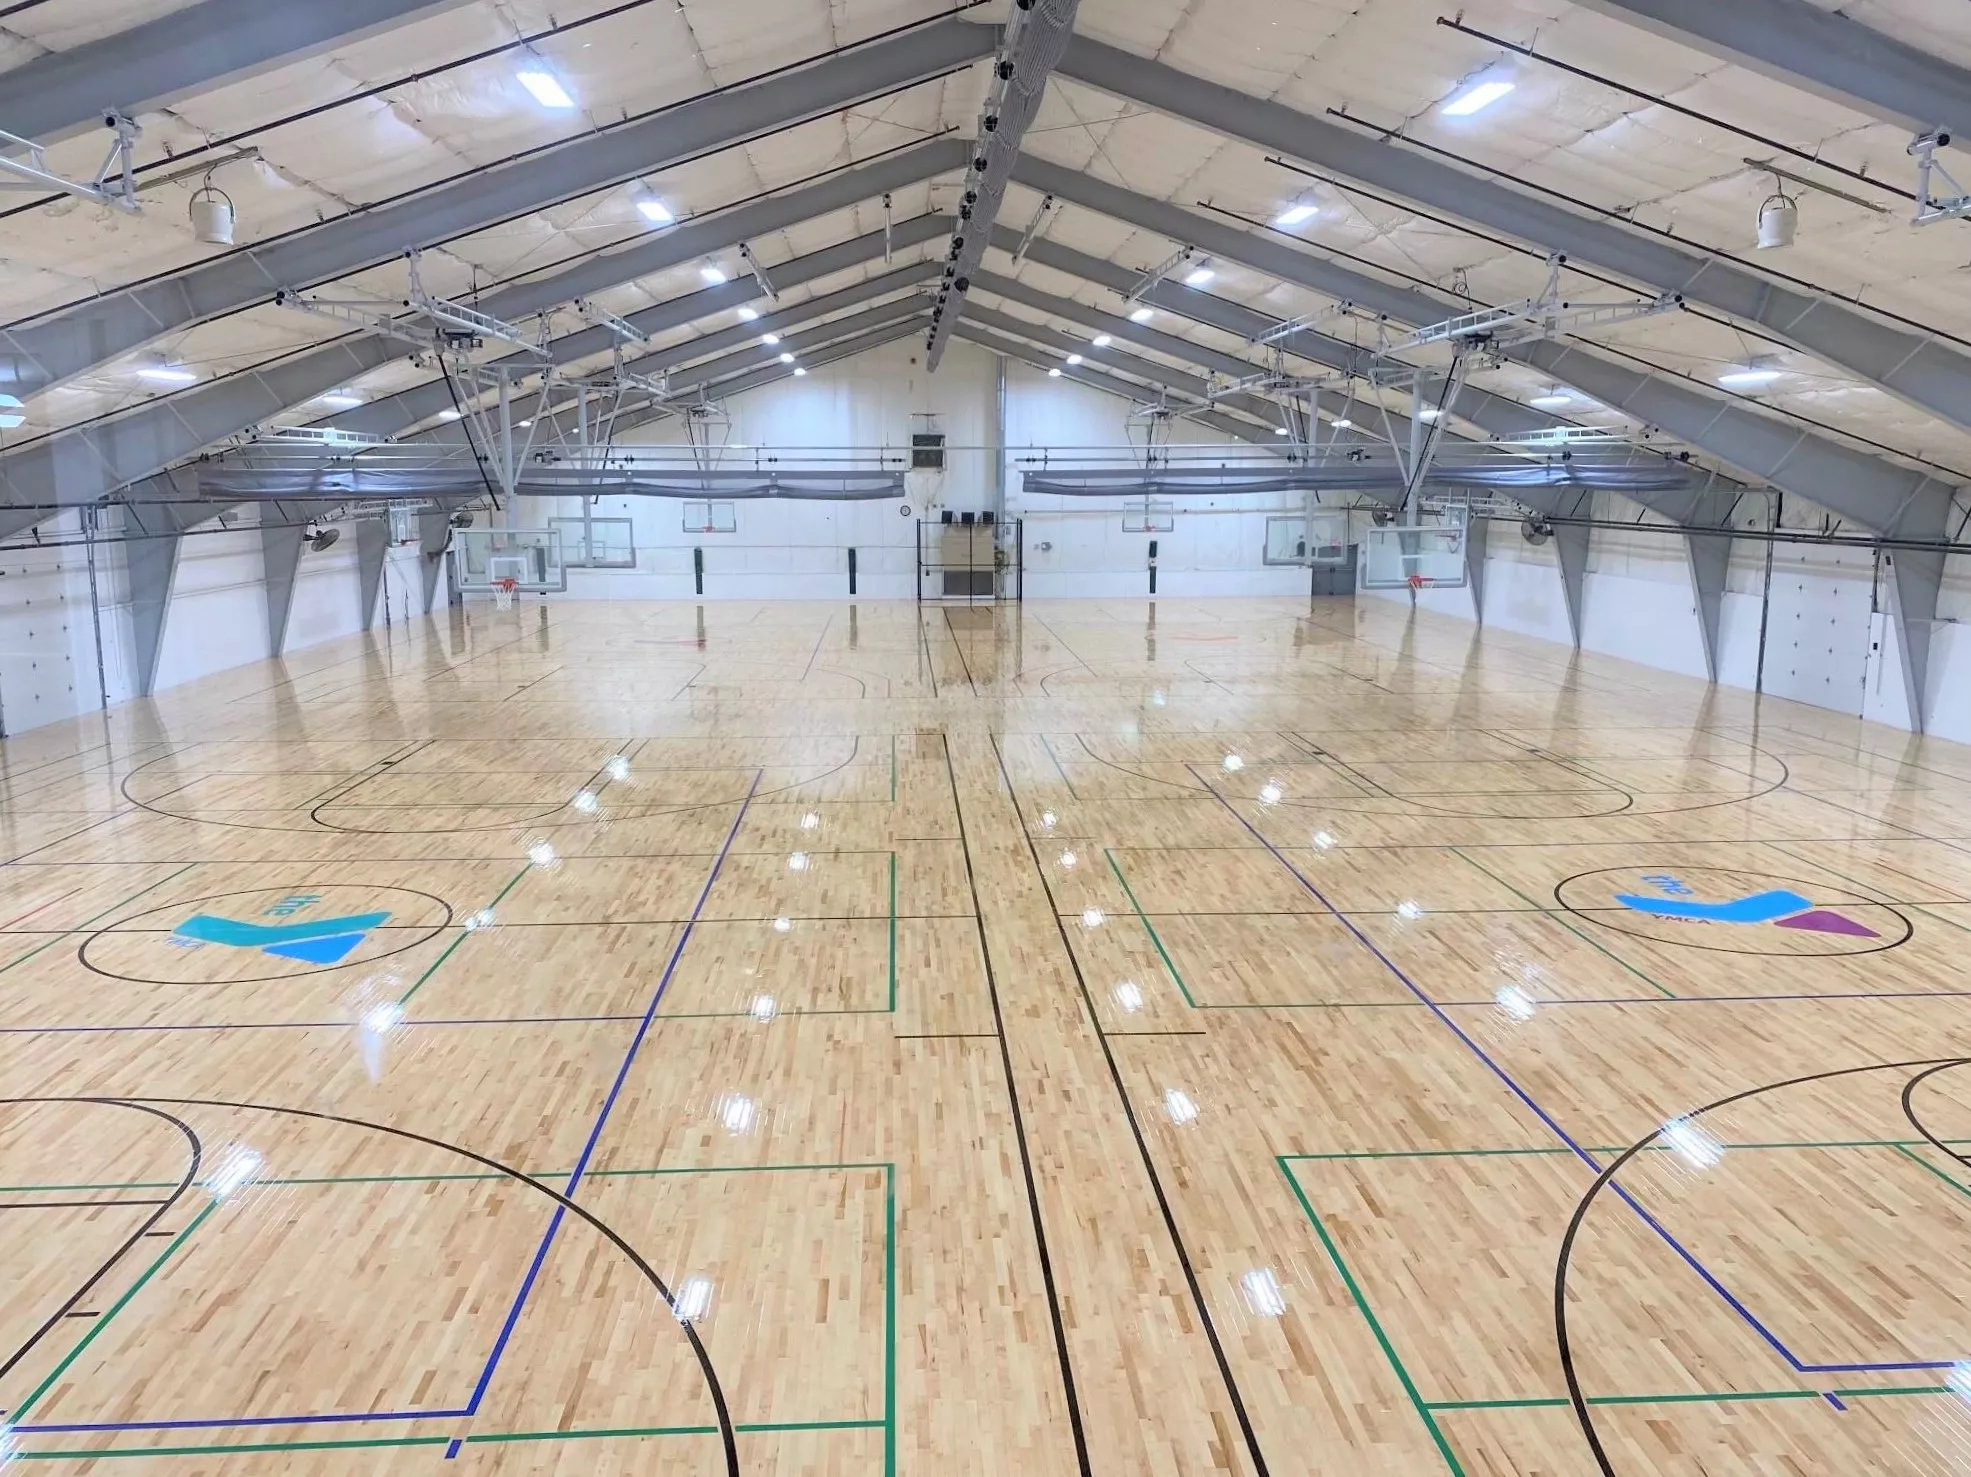 Picture of 4 indoor multi-purpose sport courts at the Wells Ave Y Field House